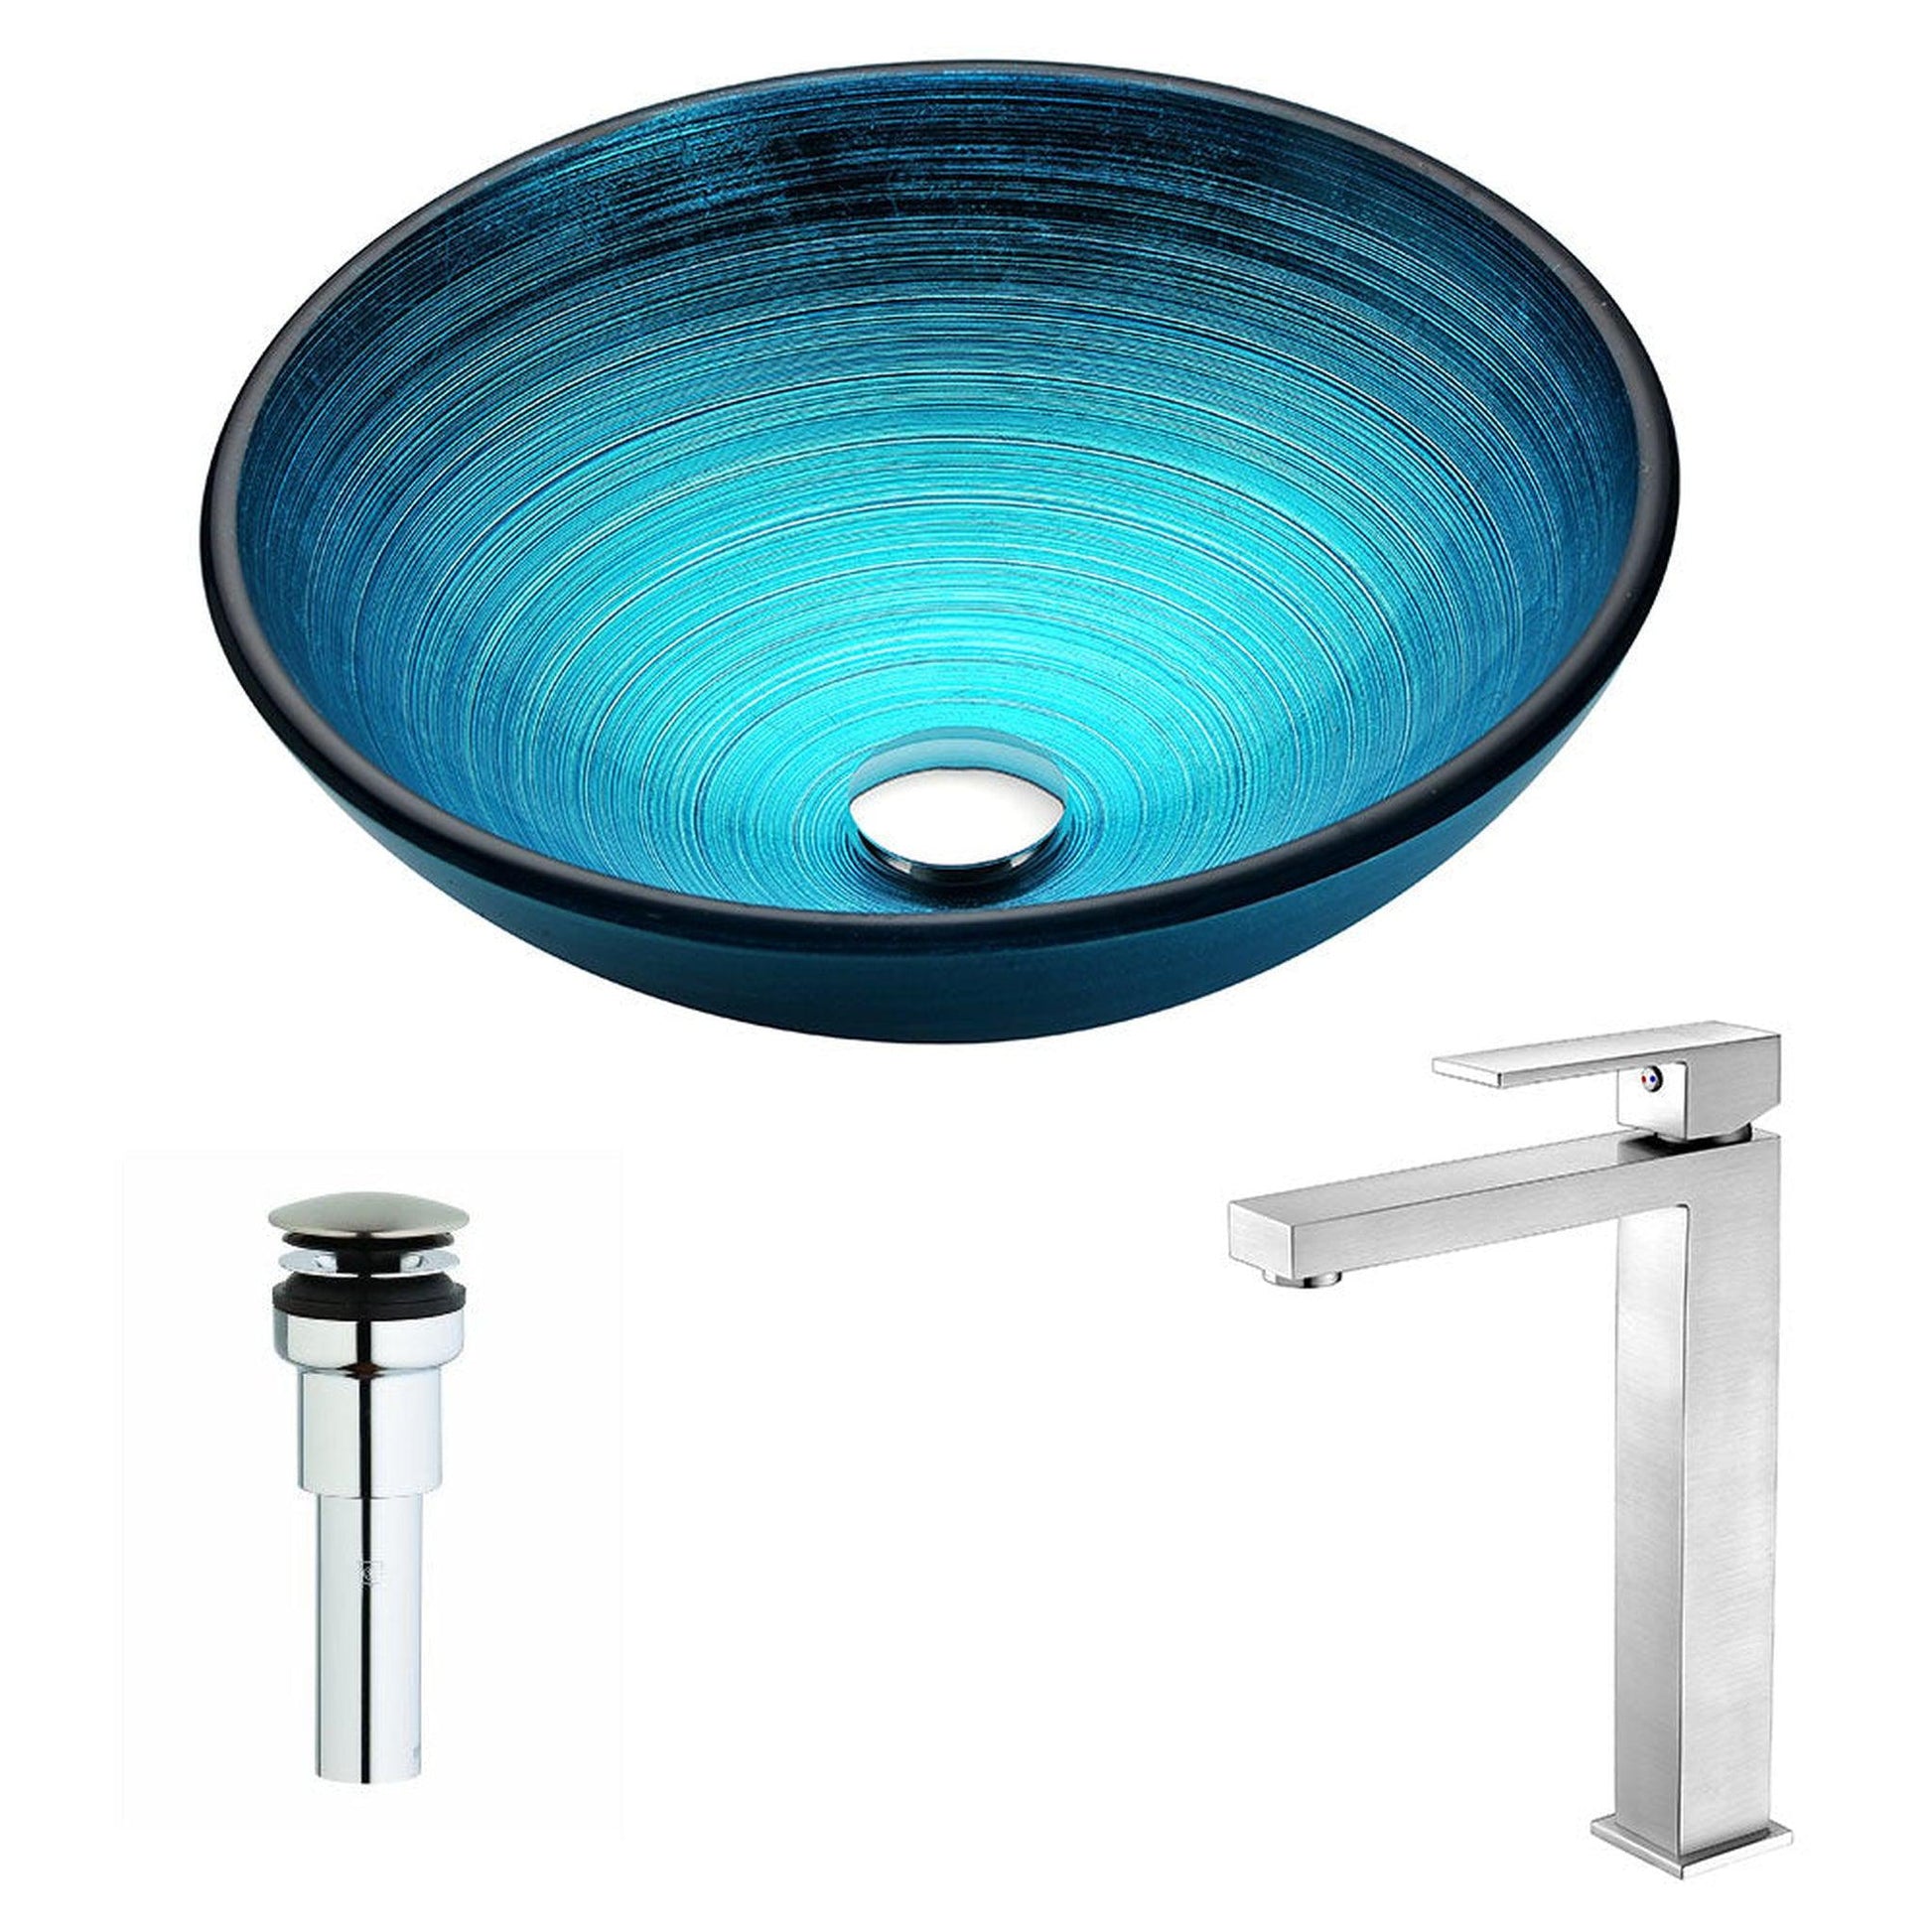 ANZZI Enti Series 17" x 17" Round Lustrous Blue Deco-Glass Vessel Sink Finish With Chrome Pop-Up Drain and Brushed Nickel Enti Faucet